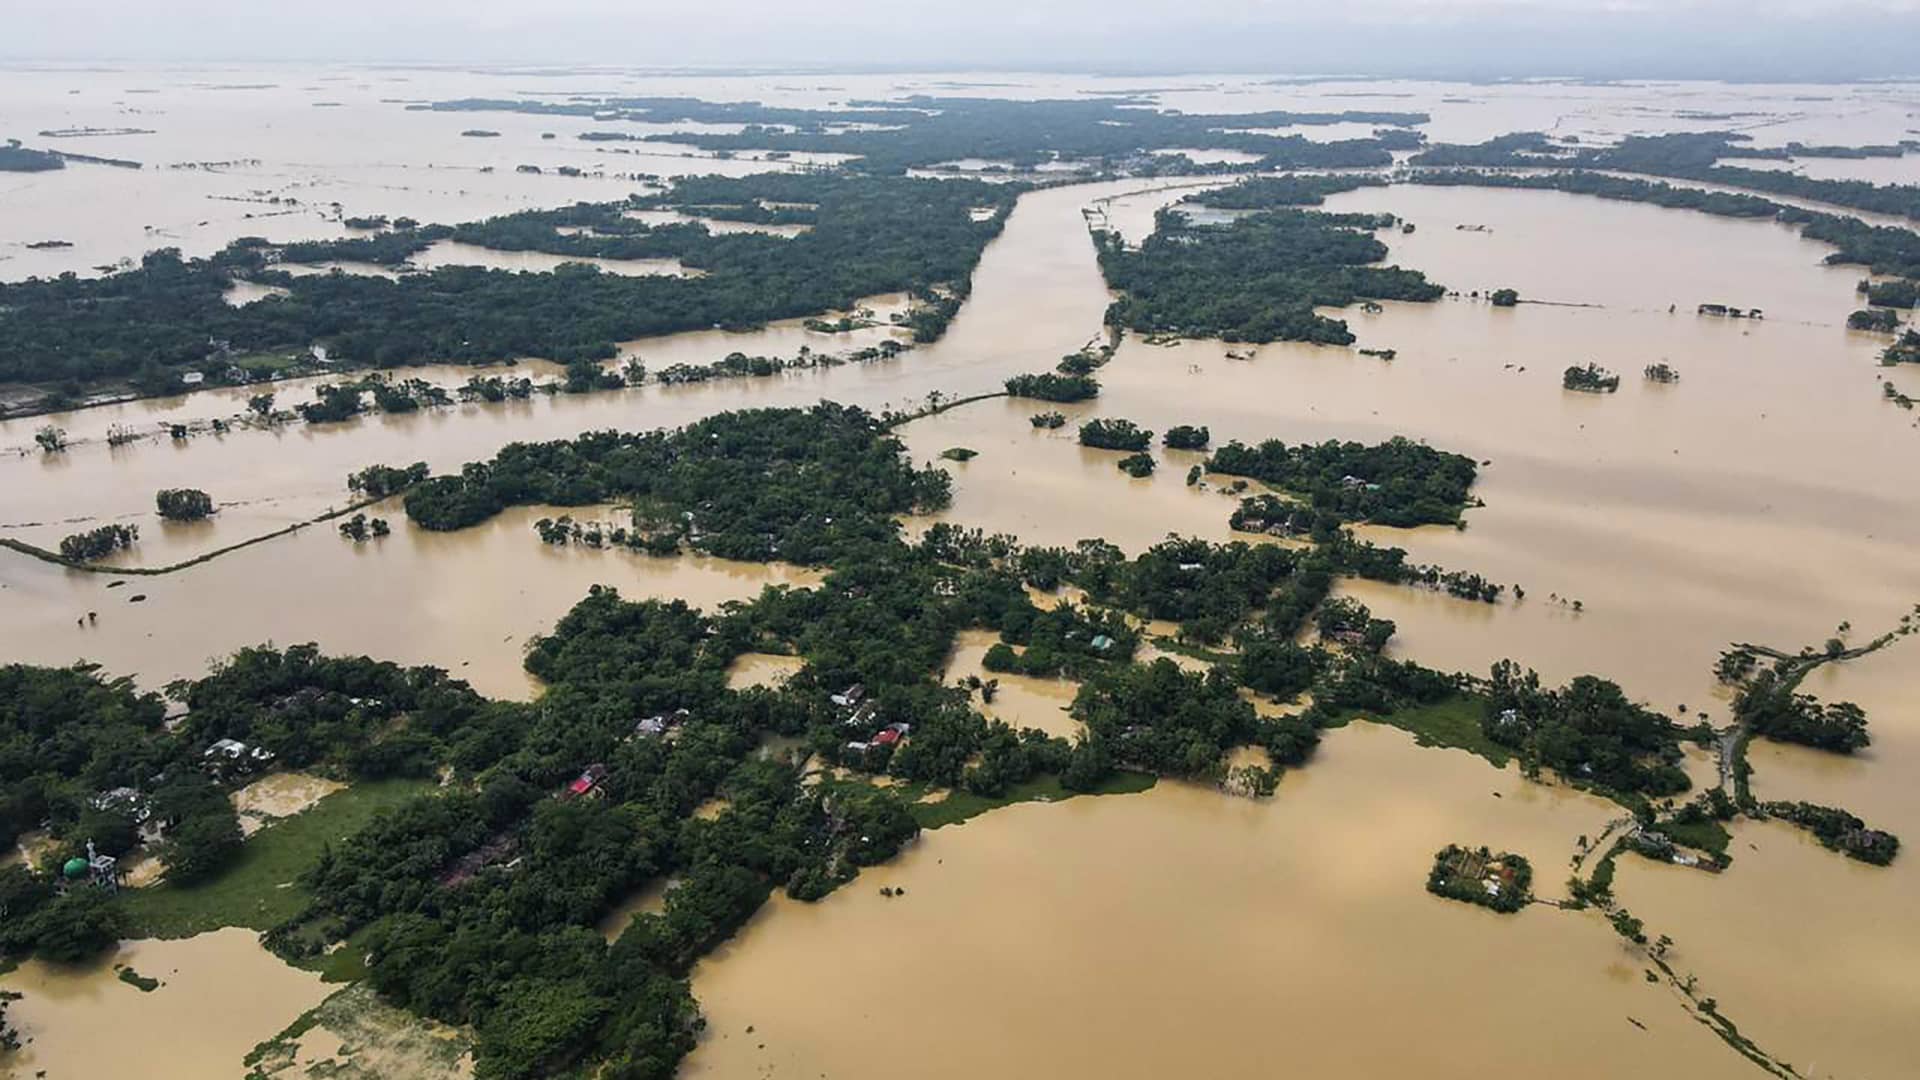 This aerial photograph shows houses inundated following heavy rains in Beanibazar, Bangladesh on May 21, 2022.